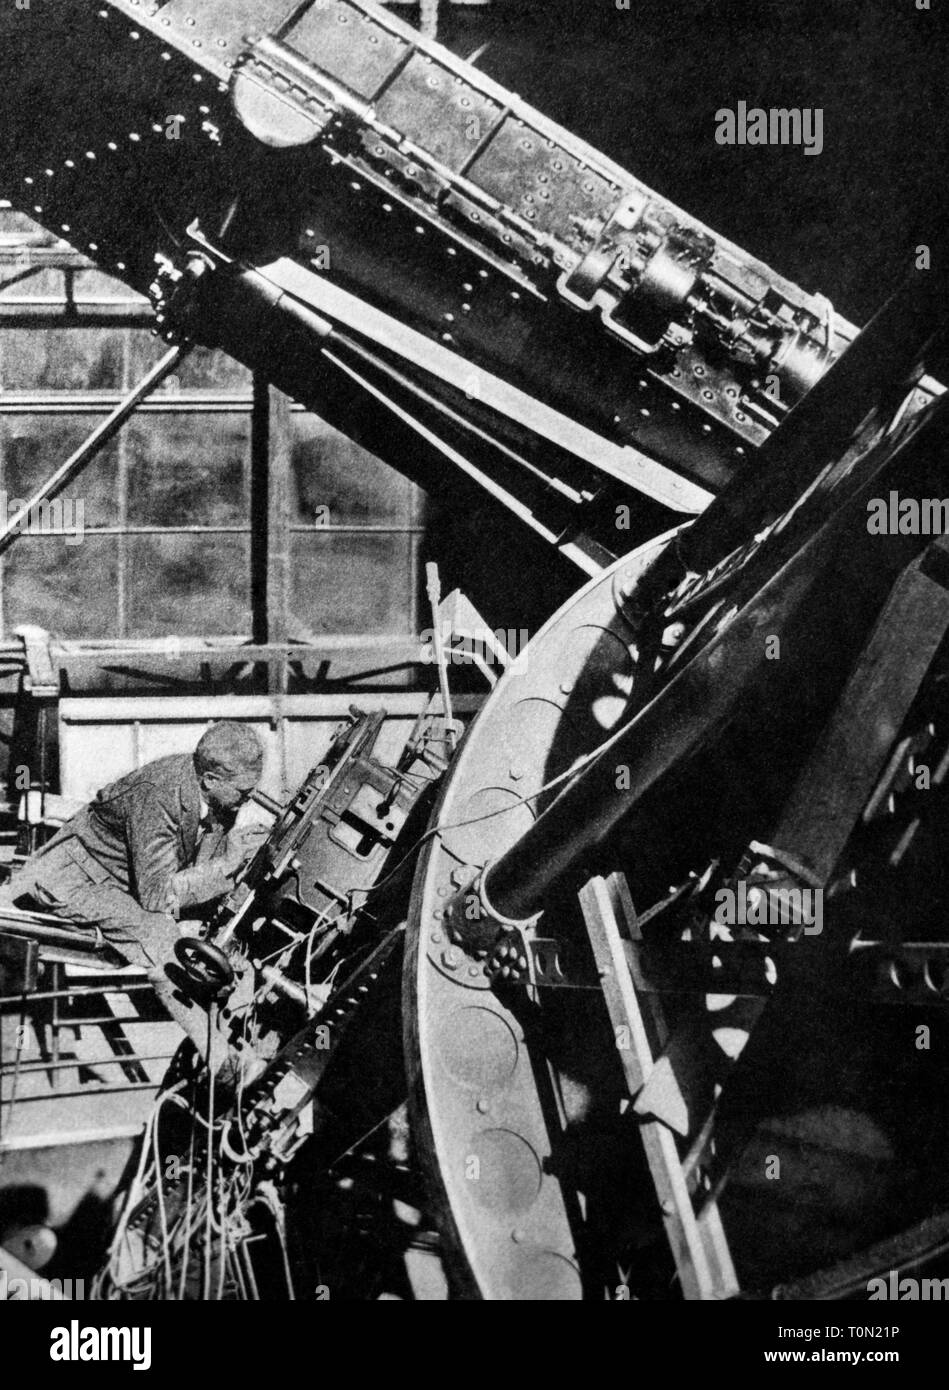 astronomical observatory in California, 1948 Stock Photo